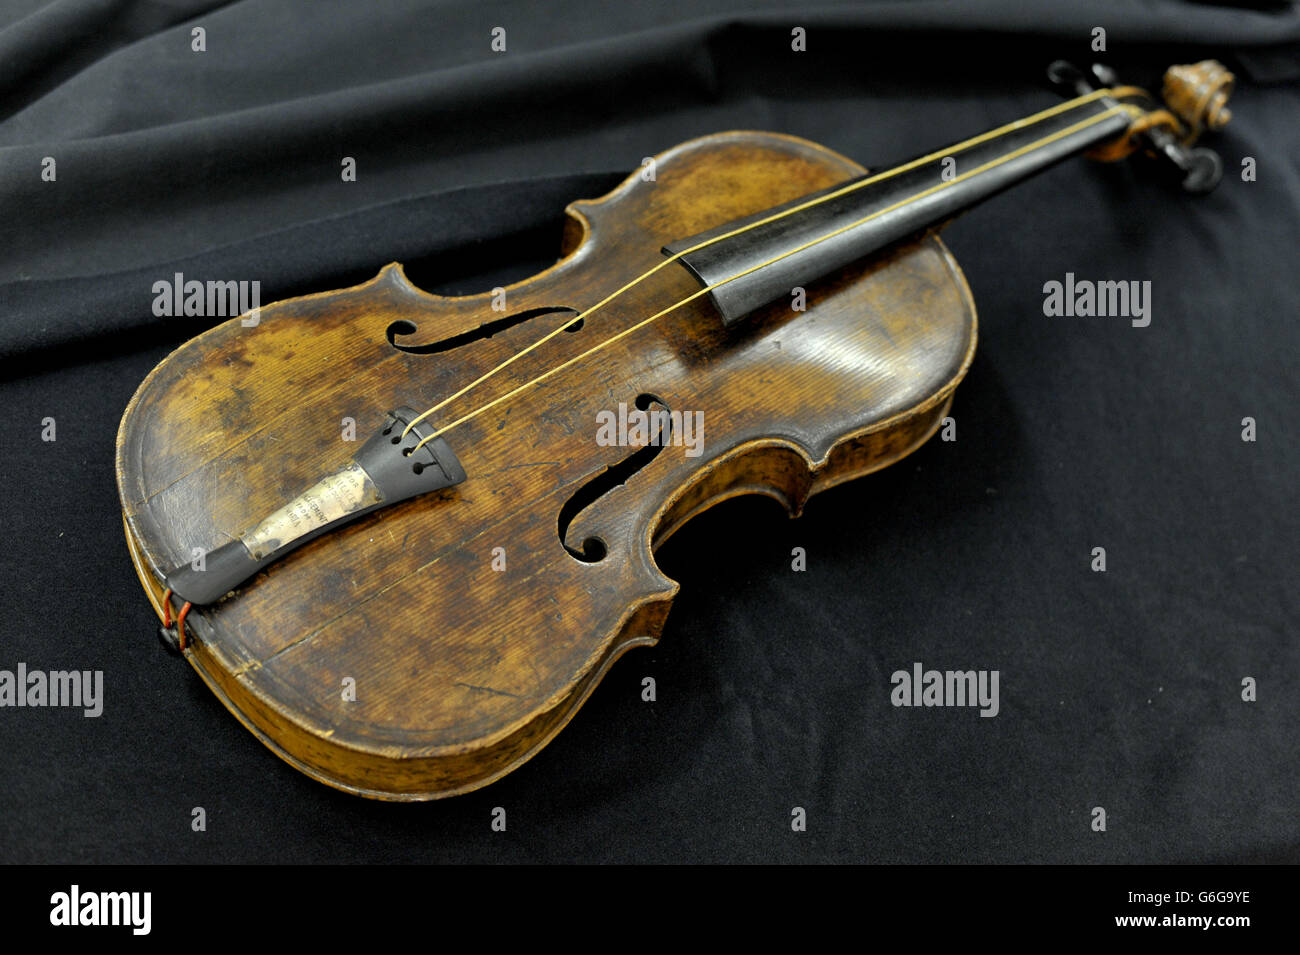 Titanic band leader Wallace Hartley's Violin, who many say played as the ship sank, on display it Henry Aldridge and Son Auctioneers in Devizes, Wiltshire, ahead of its sale on Saturday when it is expected to fetch a six-figure sum. Stock Photo